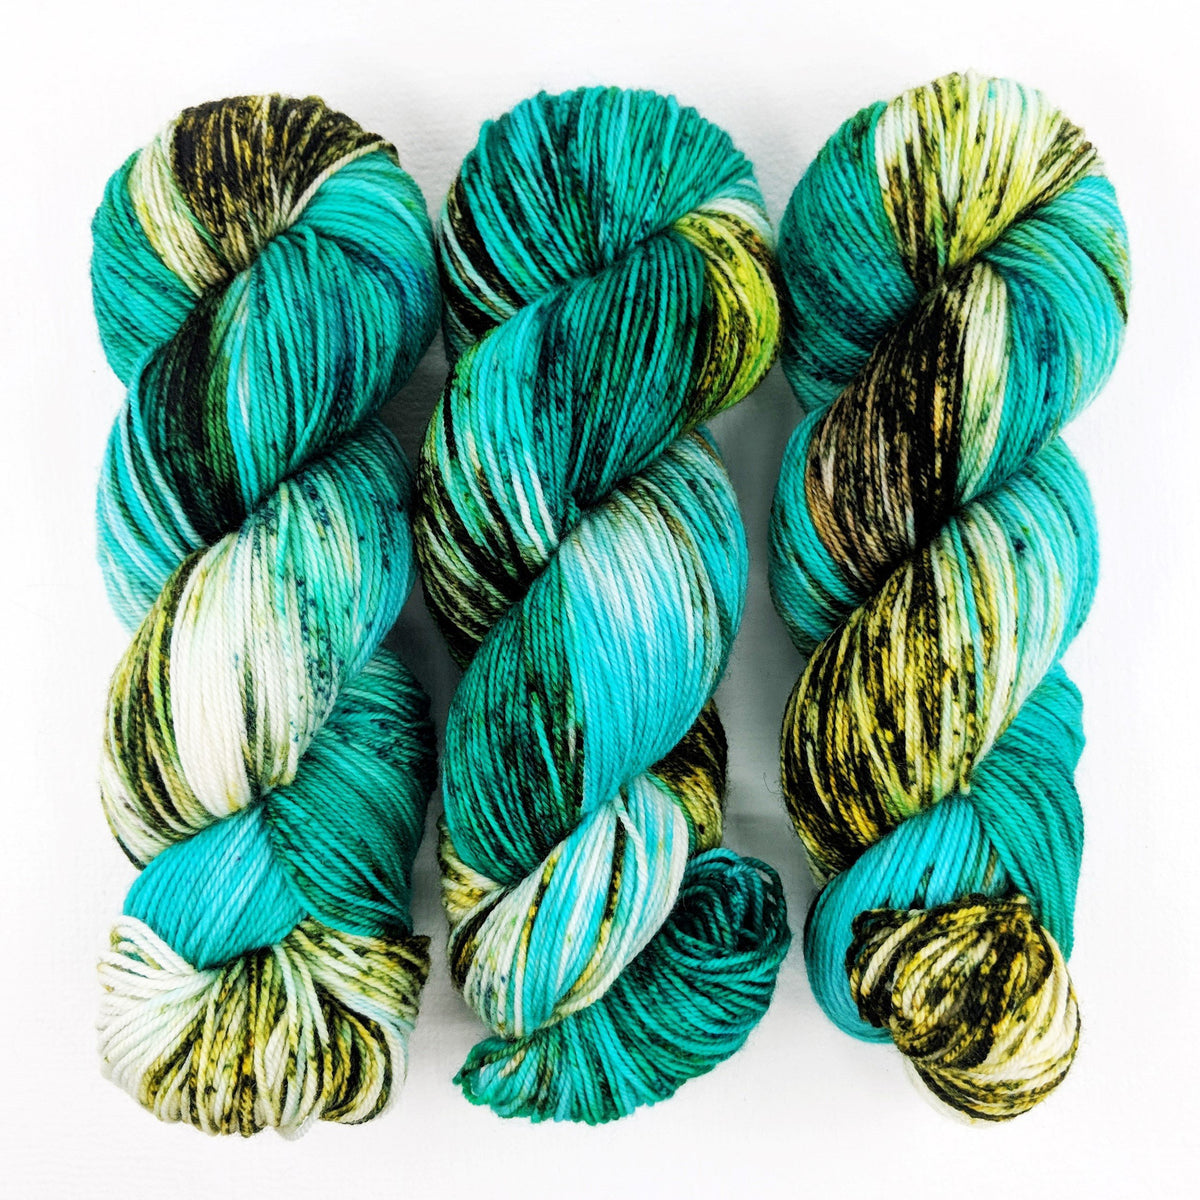 Northern Aurora - Passion 8 Fingering - Dyed Stock